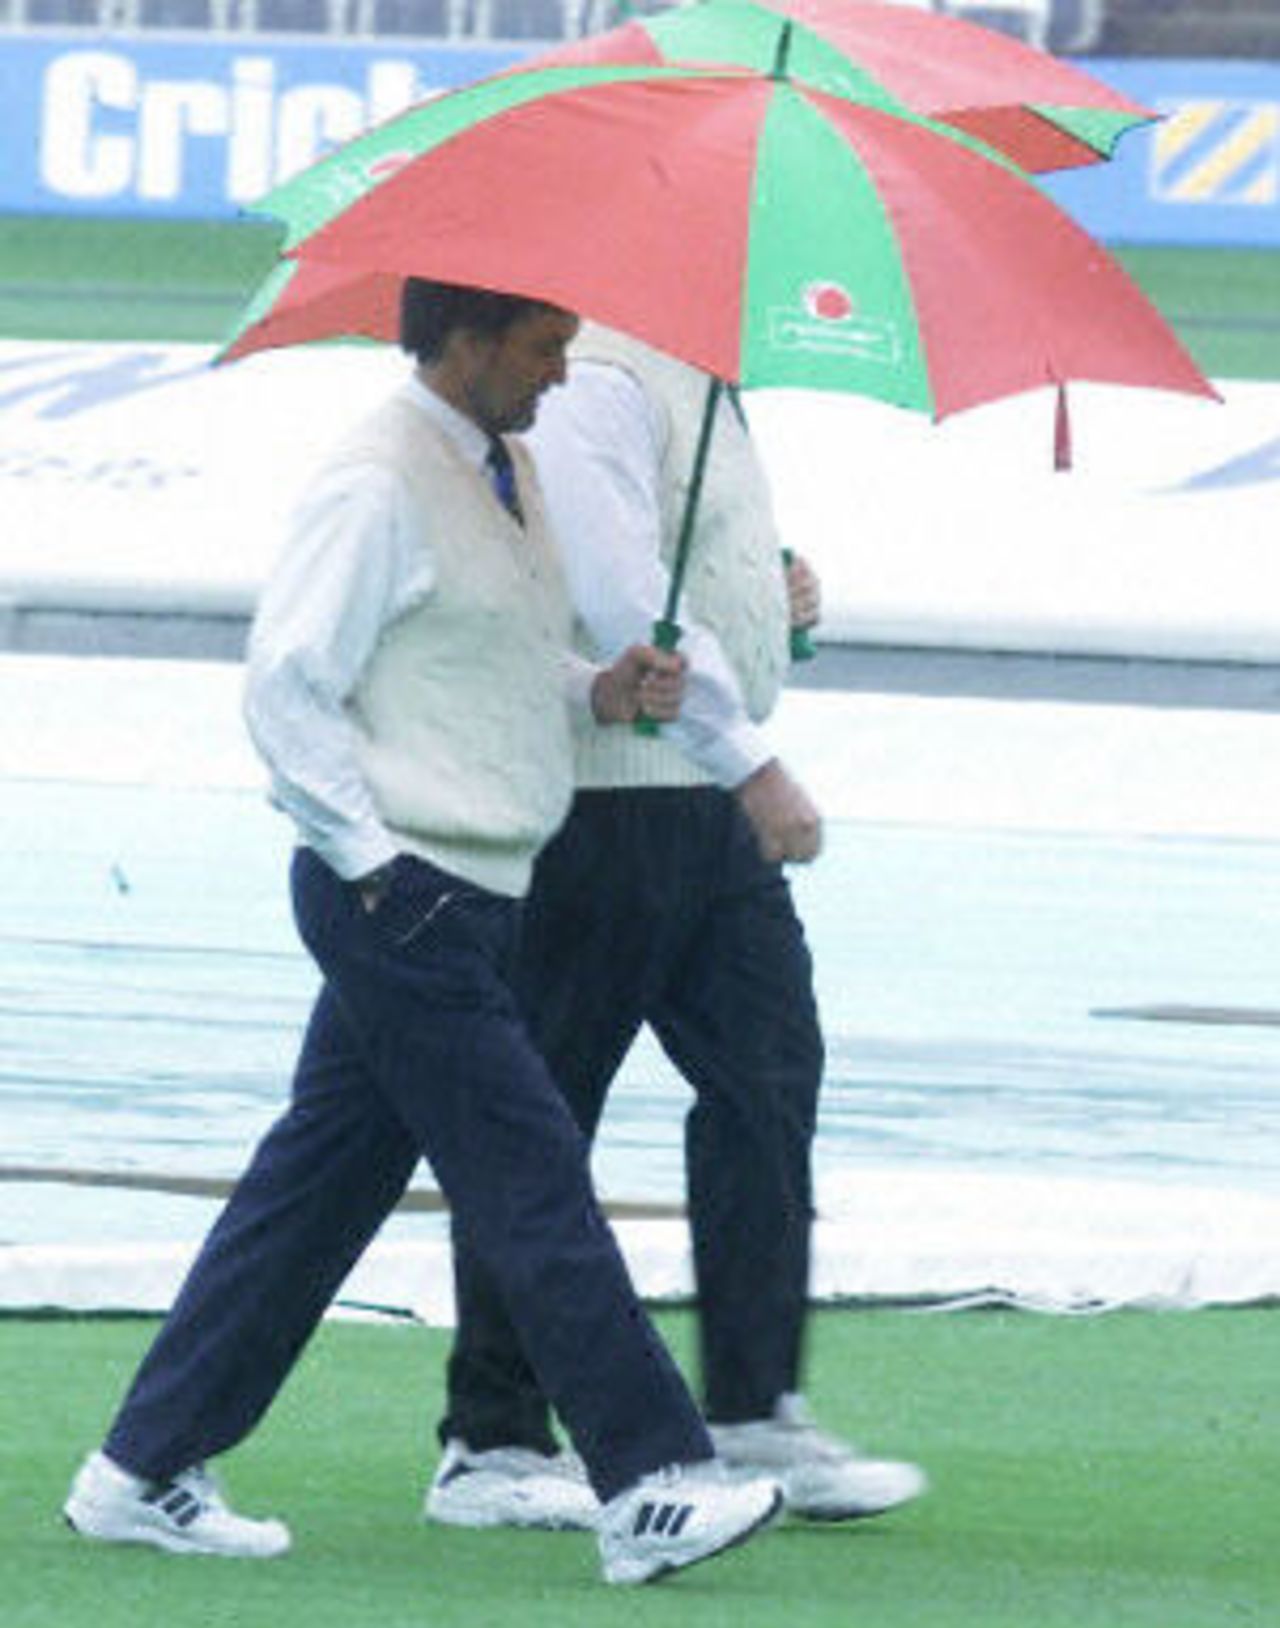 Umpires Willey and Hair after an inspection, day 1, 1st Test at Lord's, 17-21 May 2001.